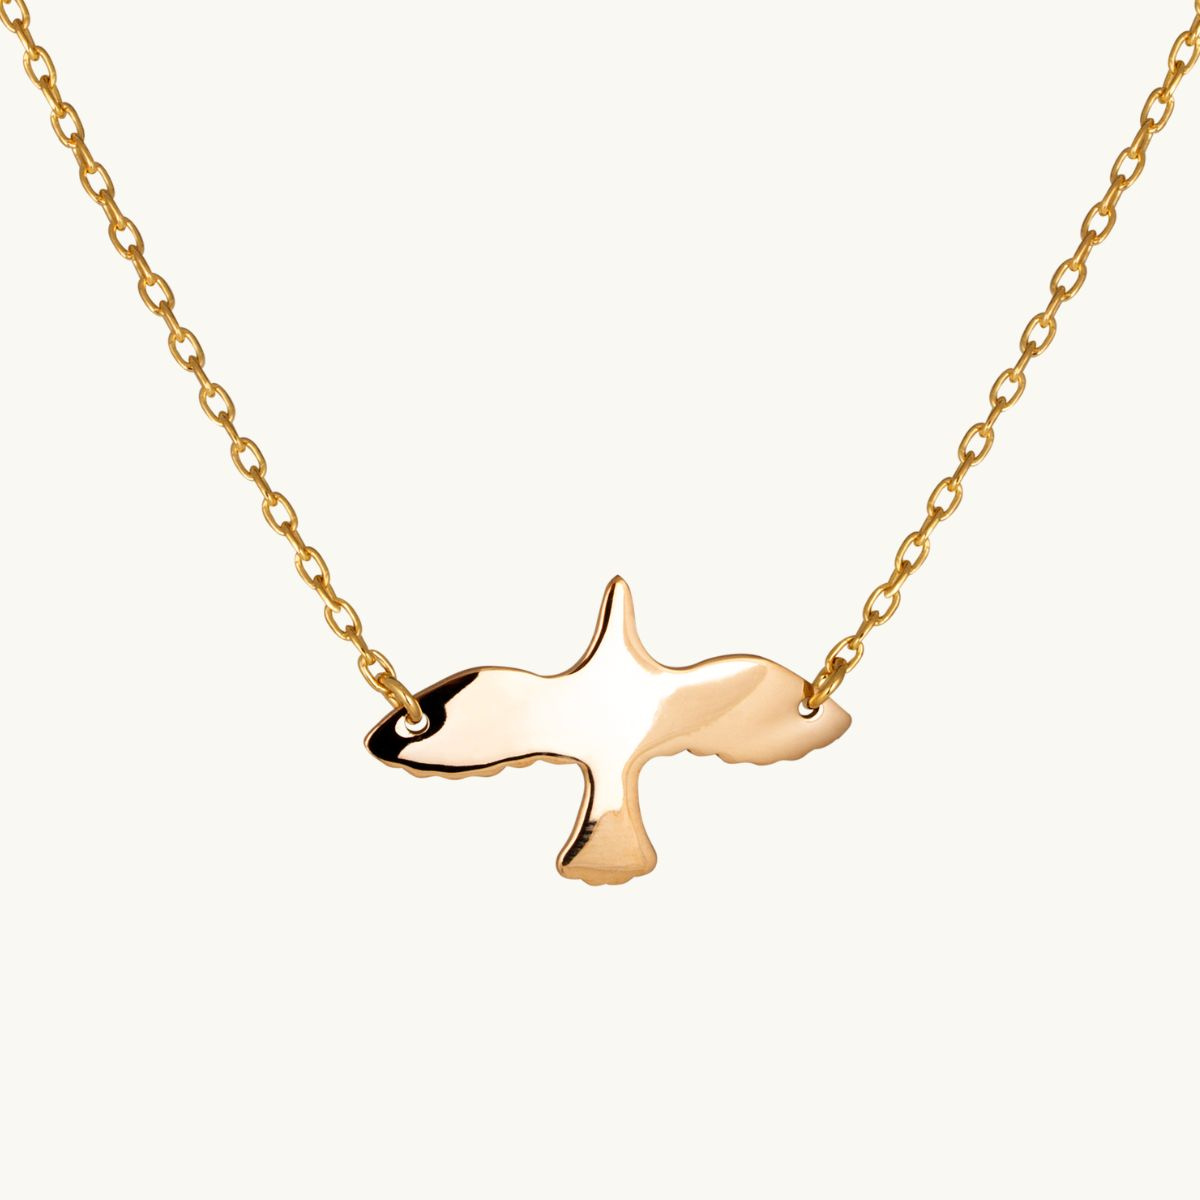 Yienate Fashion Layered Necklace Peace Dove Necklace Jewelry for Women and  Girls (Gold) : Amazon.co.uk: Fashion